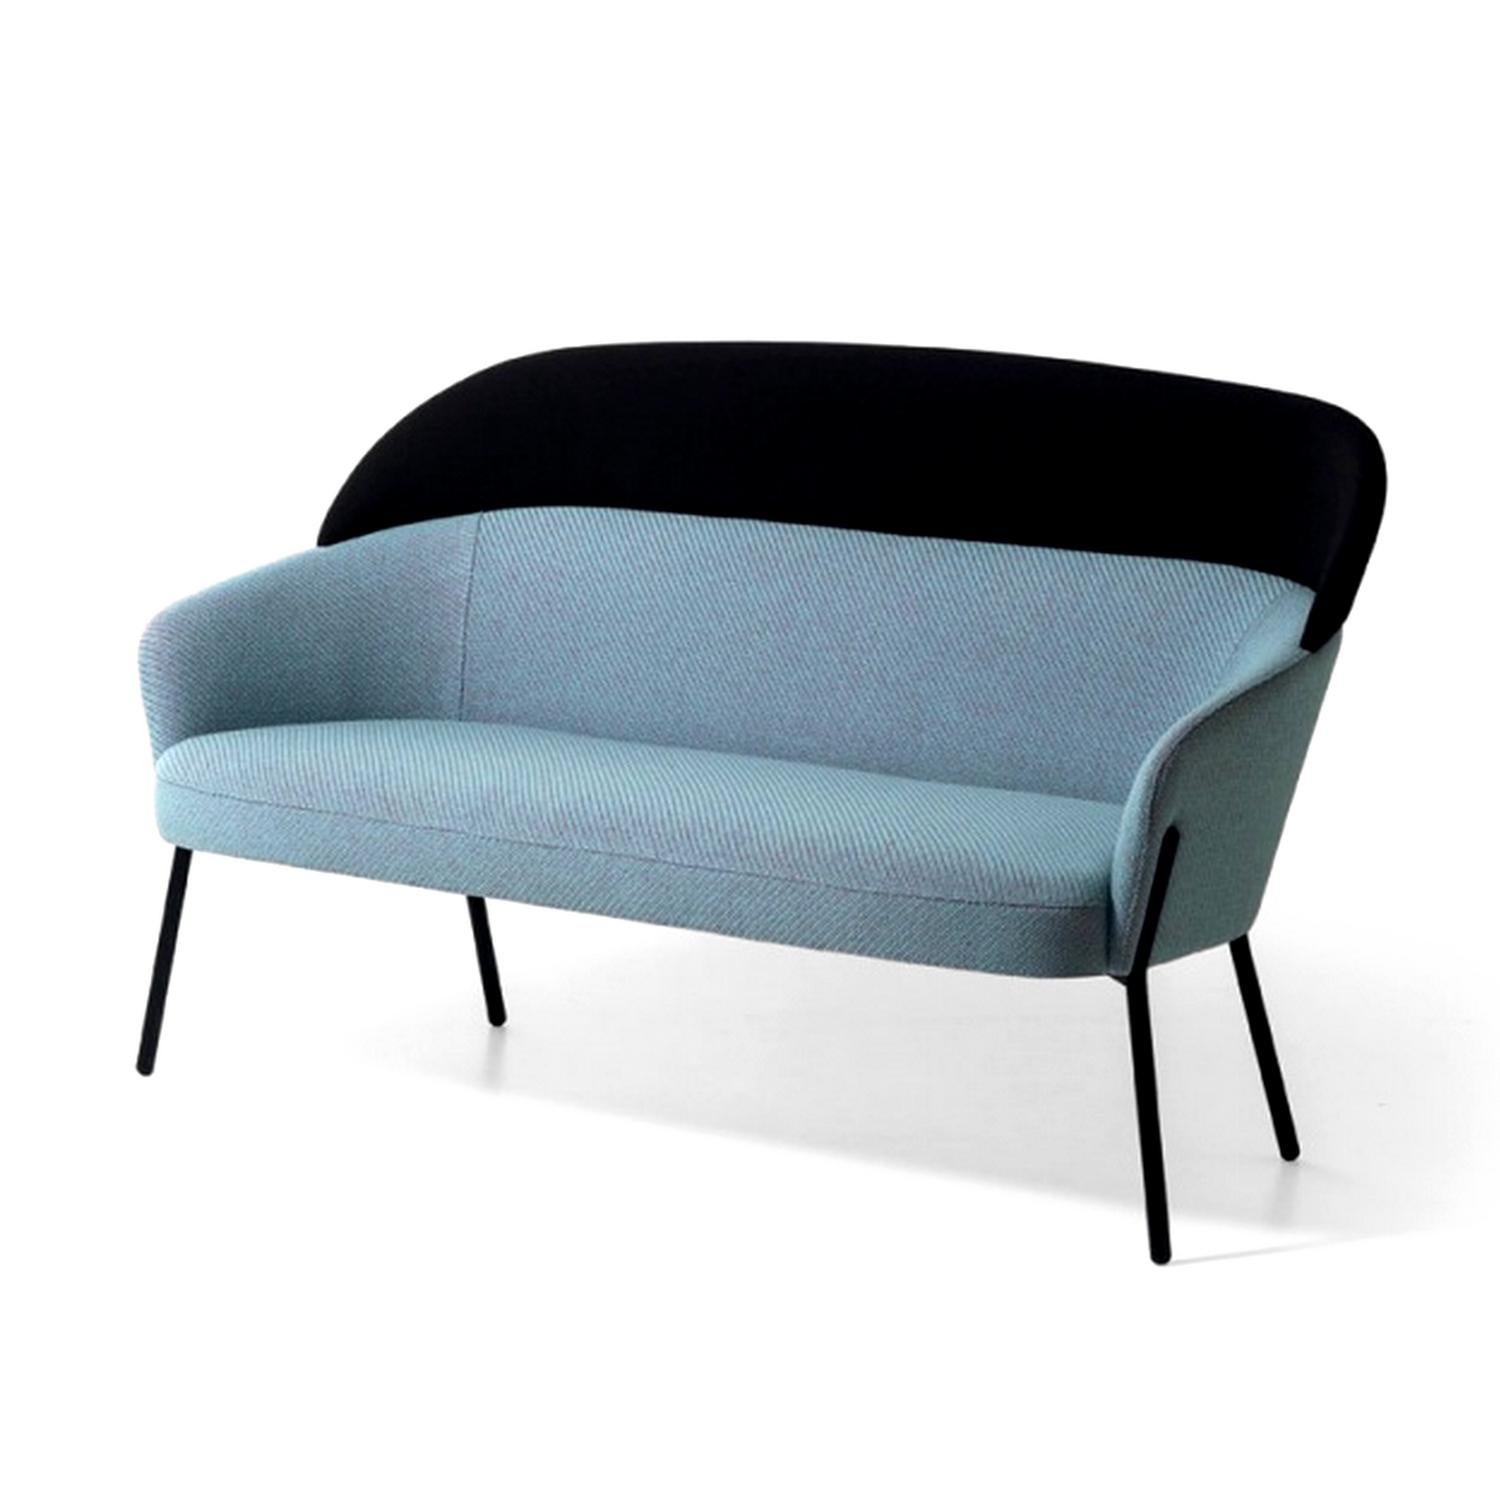 Modern Wam Blue Sofa, Designed by Marco Zito, Made in Italy For Sale